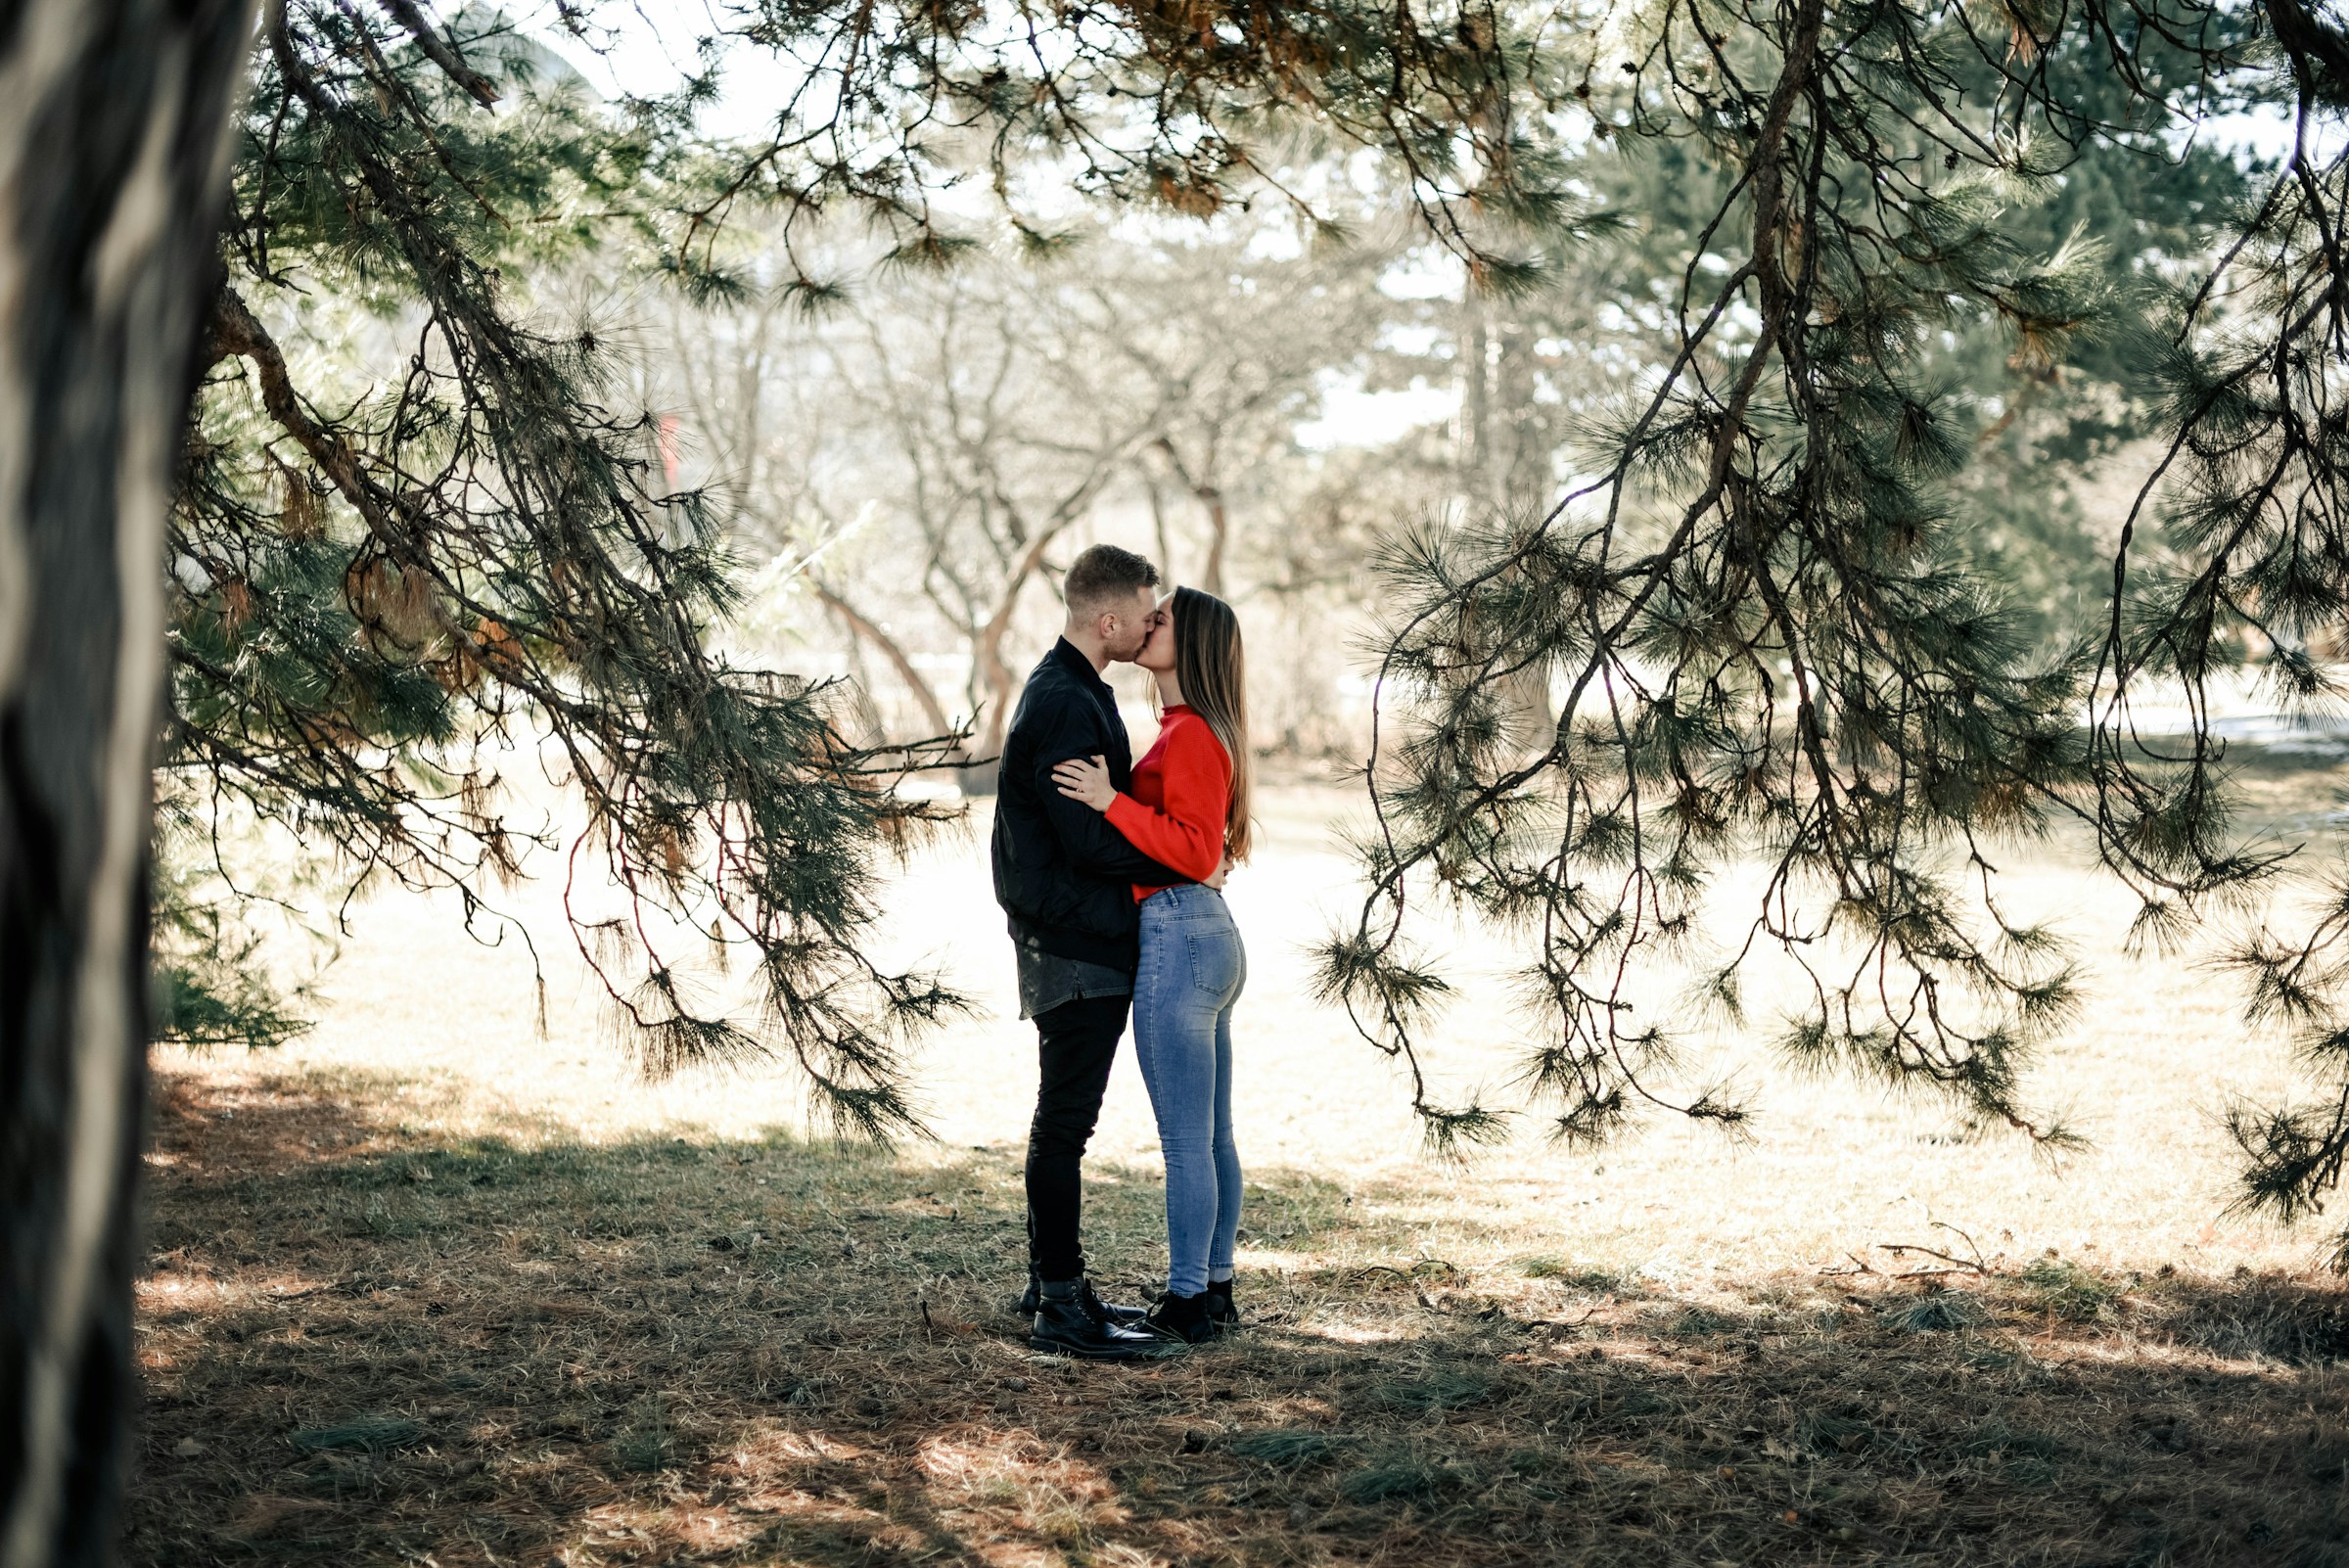 Couple kissing in a forest | Source: Unsplash